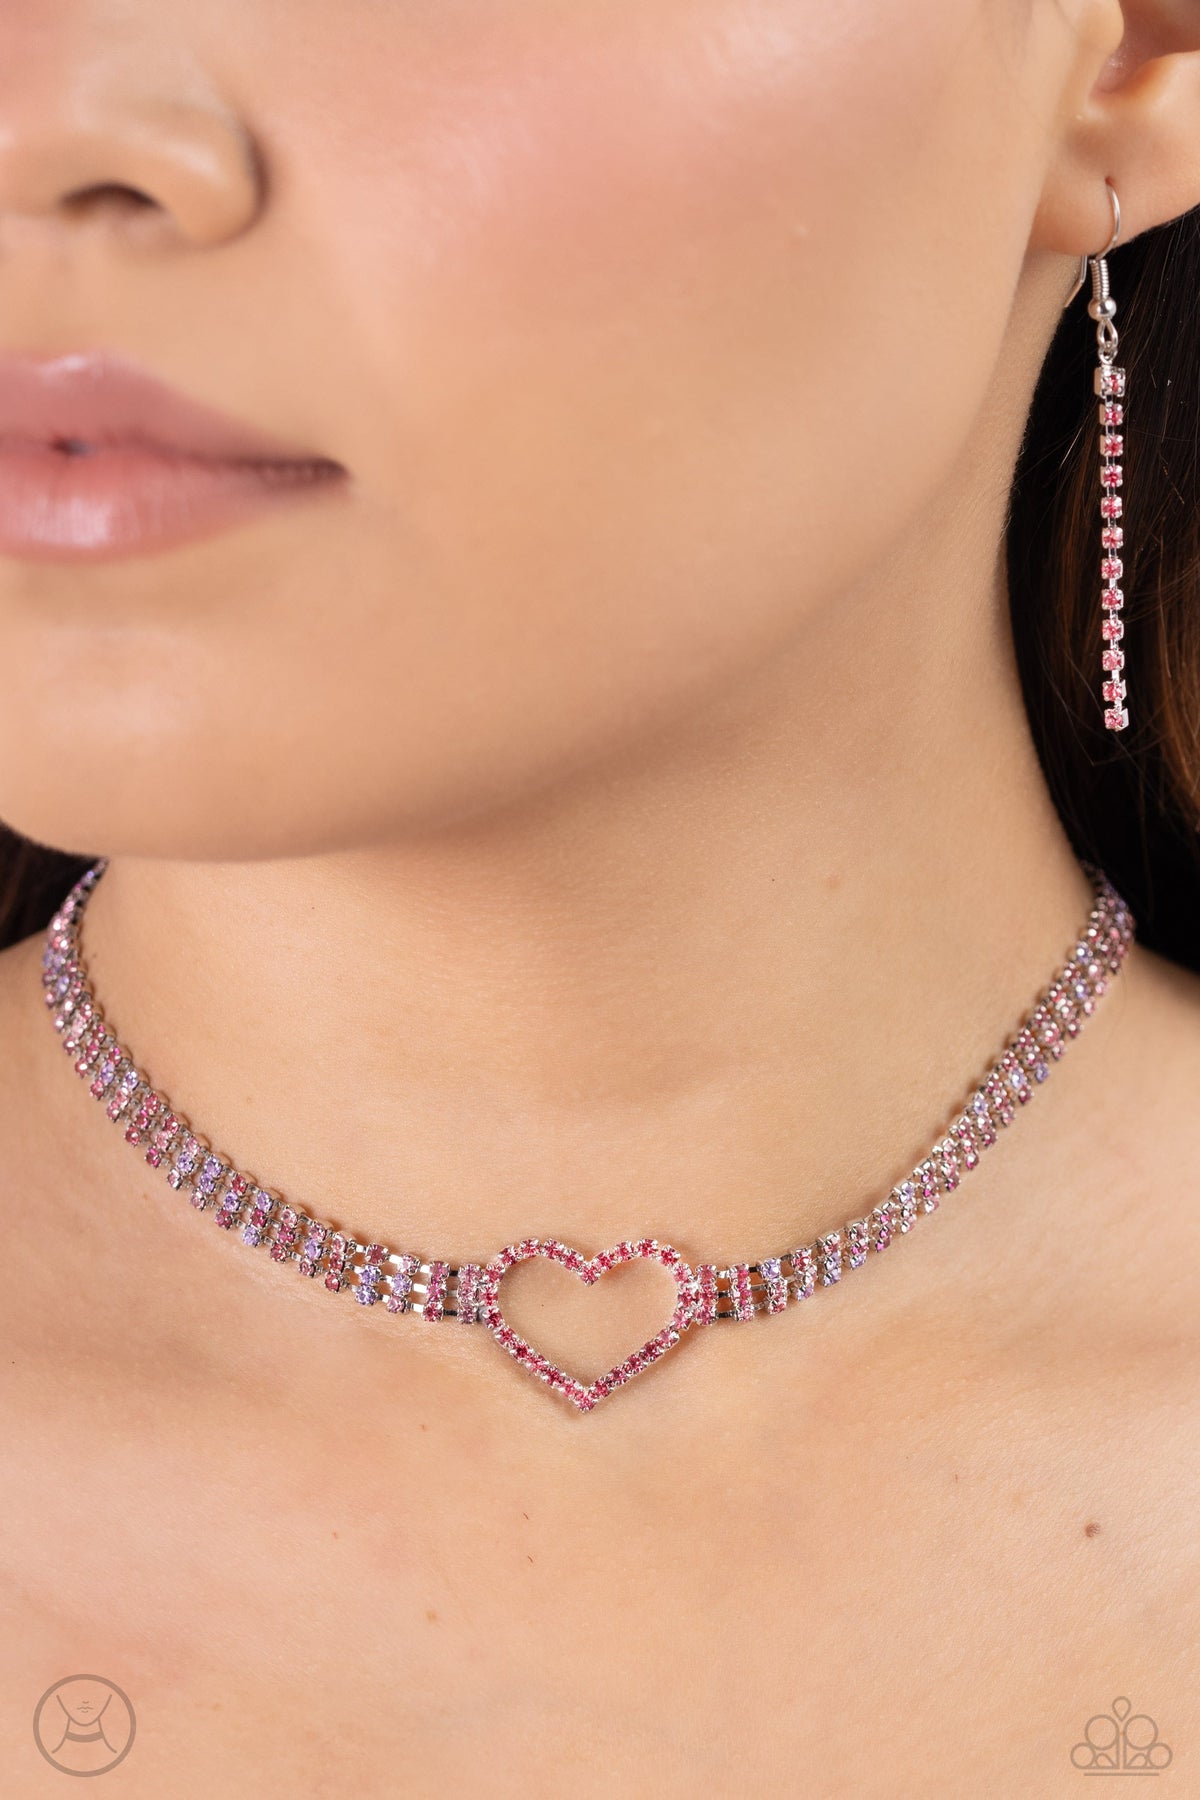 Rows of Romance Pink Rhinestone Heart Choker Necklace - Paparazzi Accessories-on model - CarasShop.com - $5 Jewelry by Cara Jewels